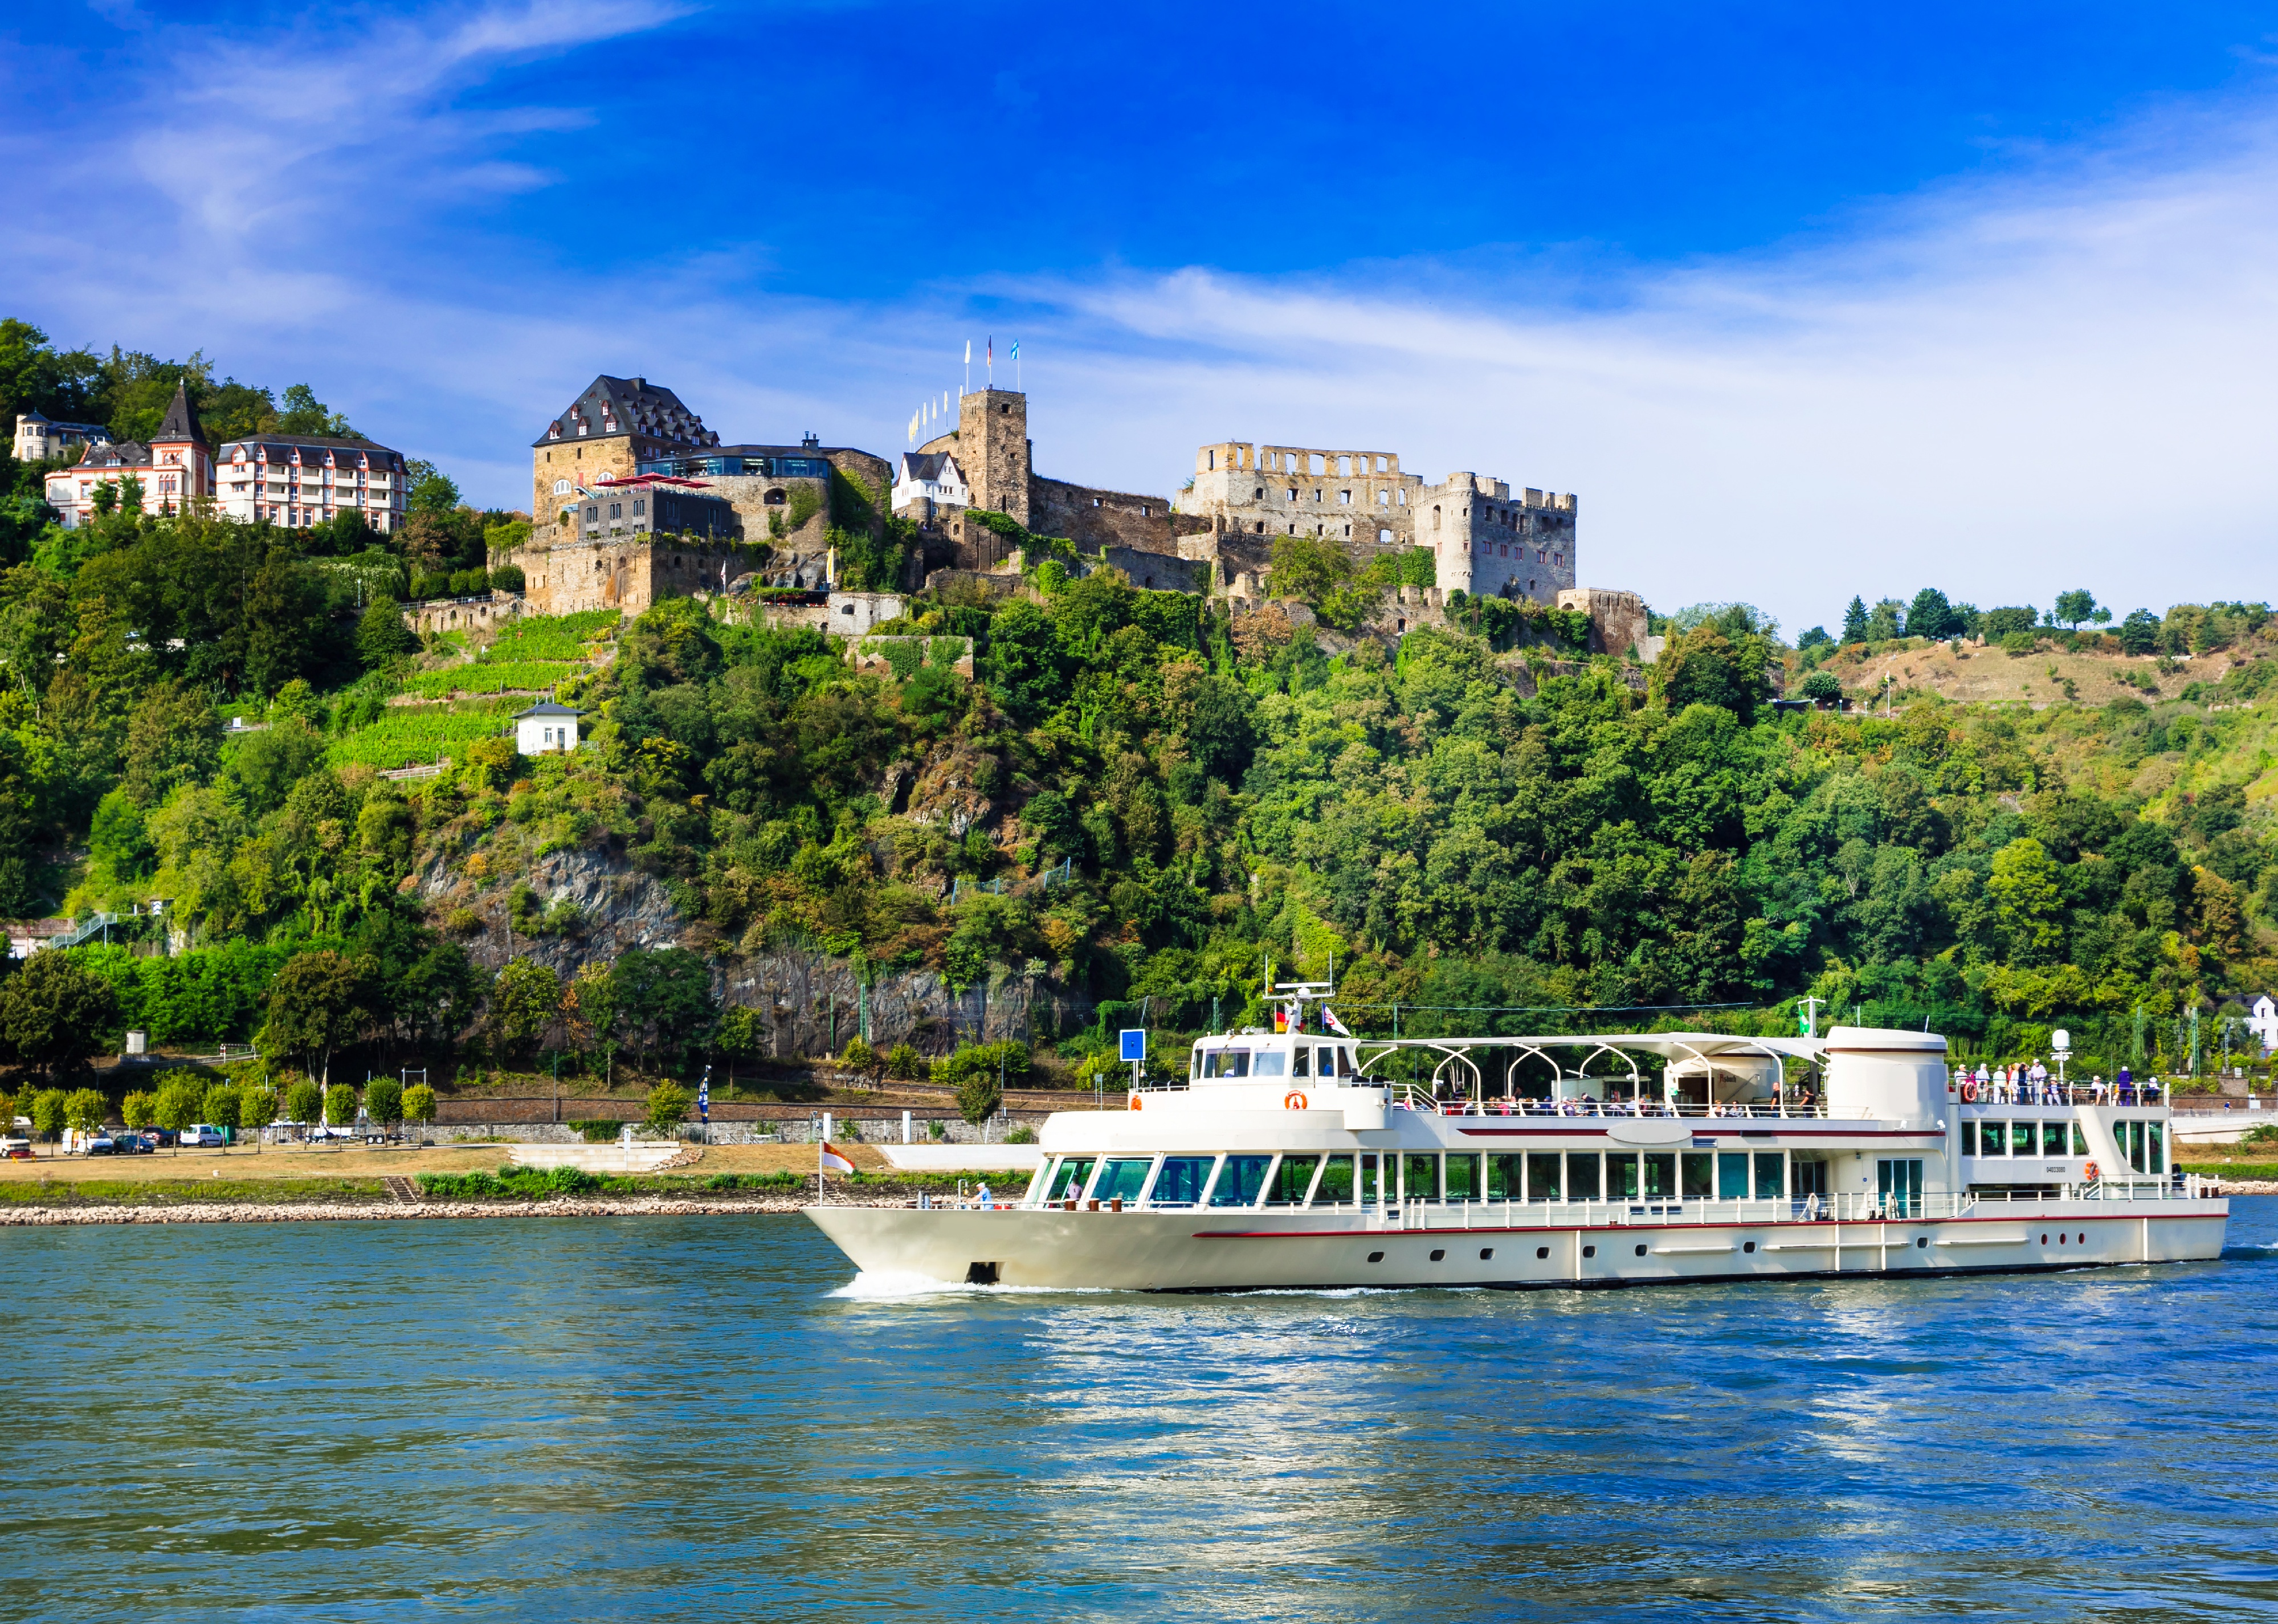 River cruise boat over Rhine with medieval castles in background.